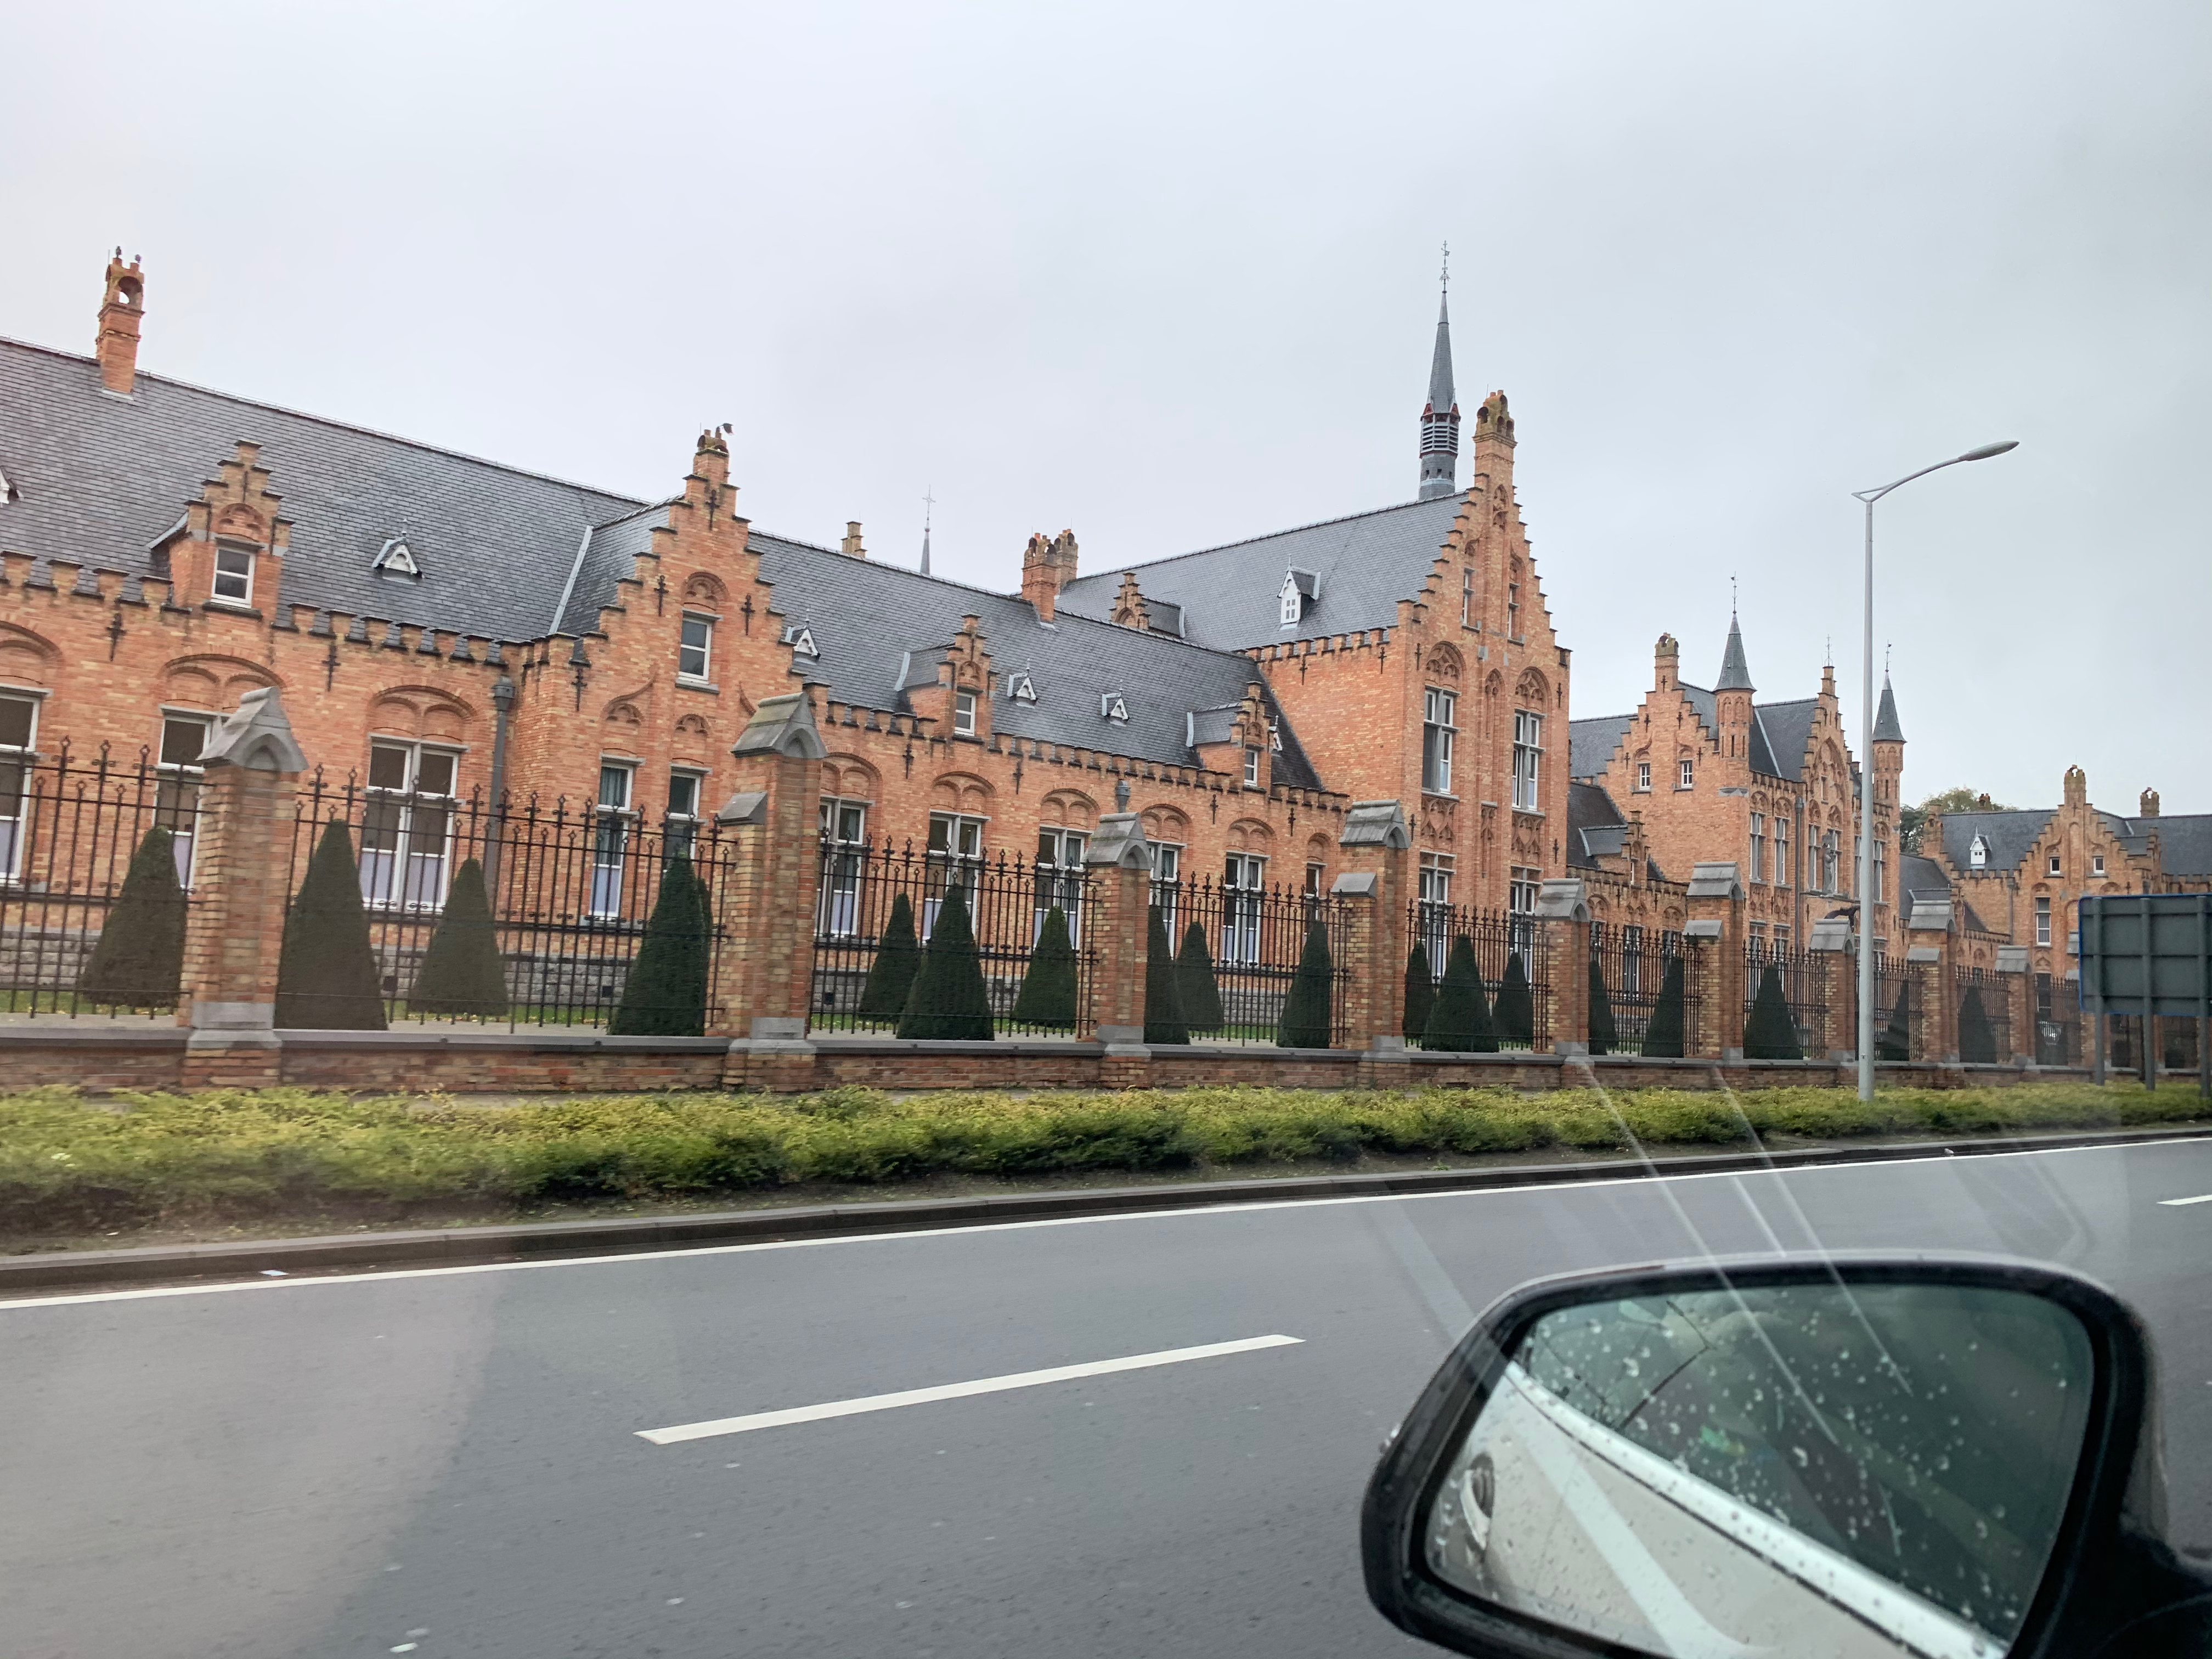 Large orange brick building along roadside. The photo is taken from within a car with the wing-mirror visible in the bottom left